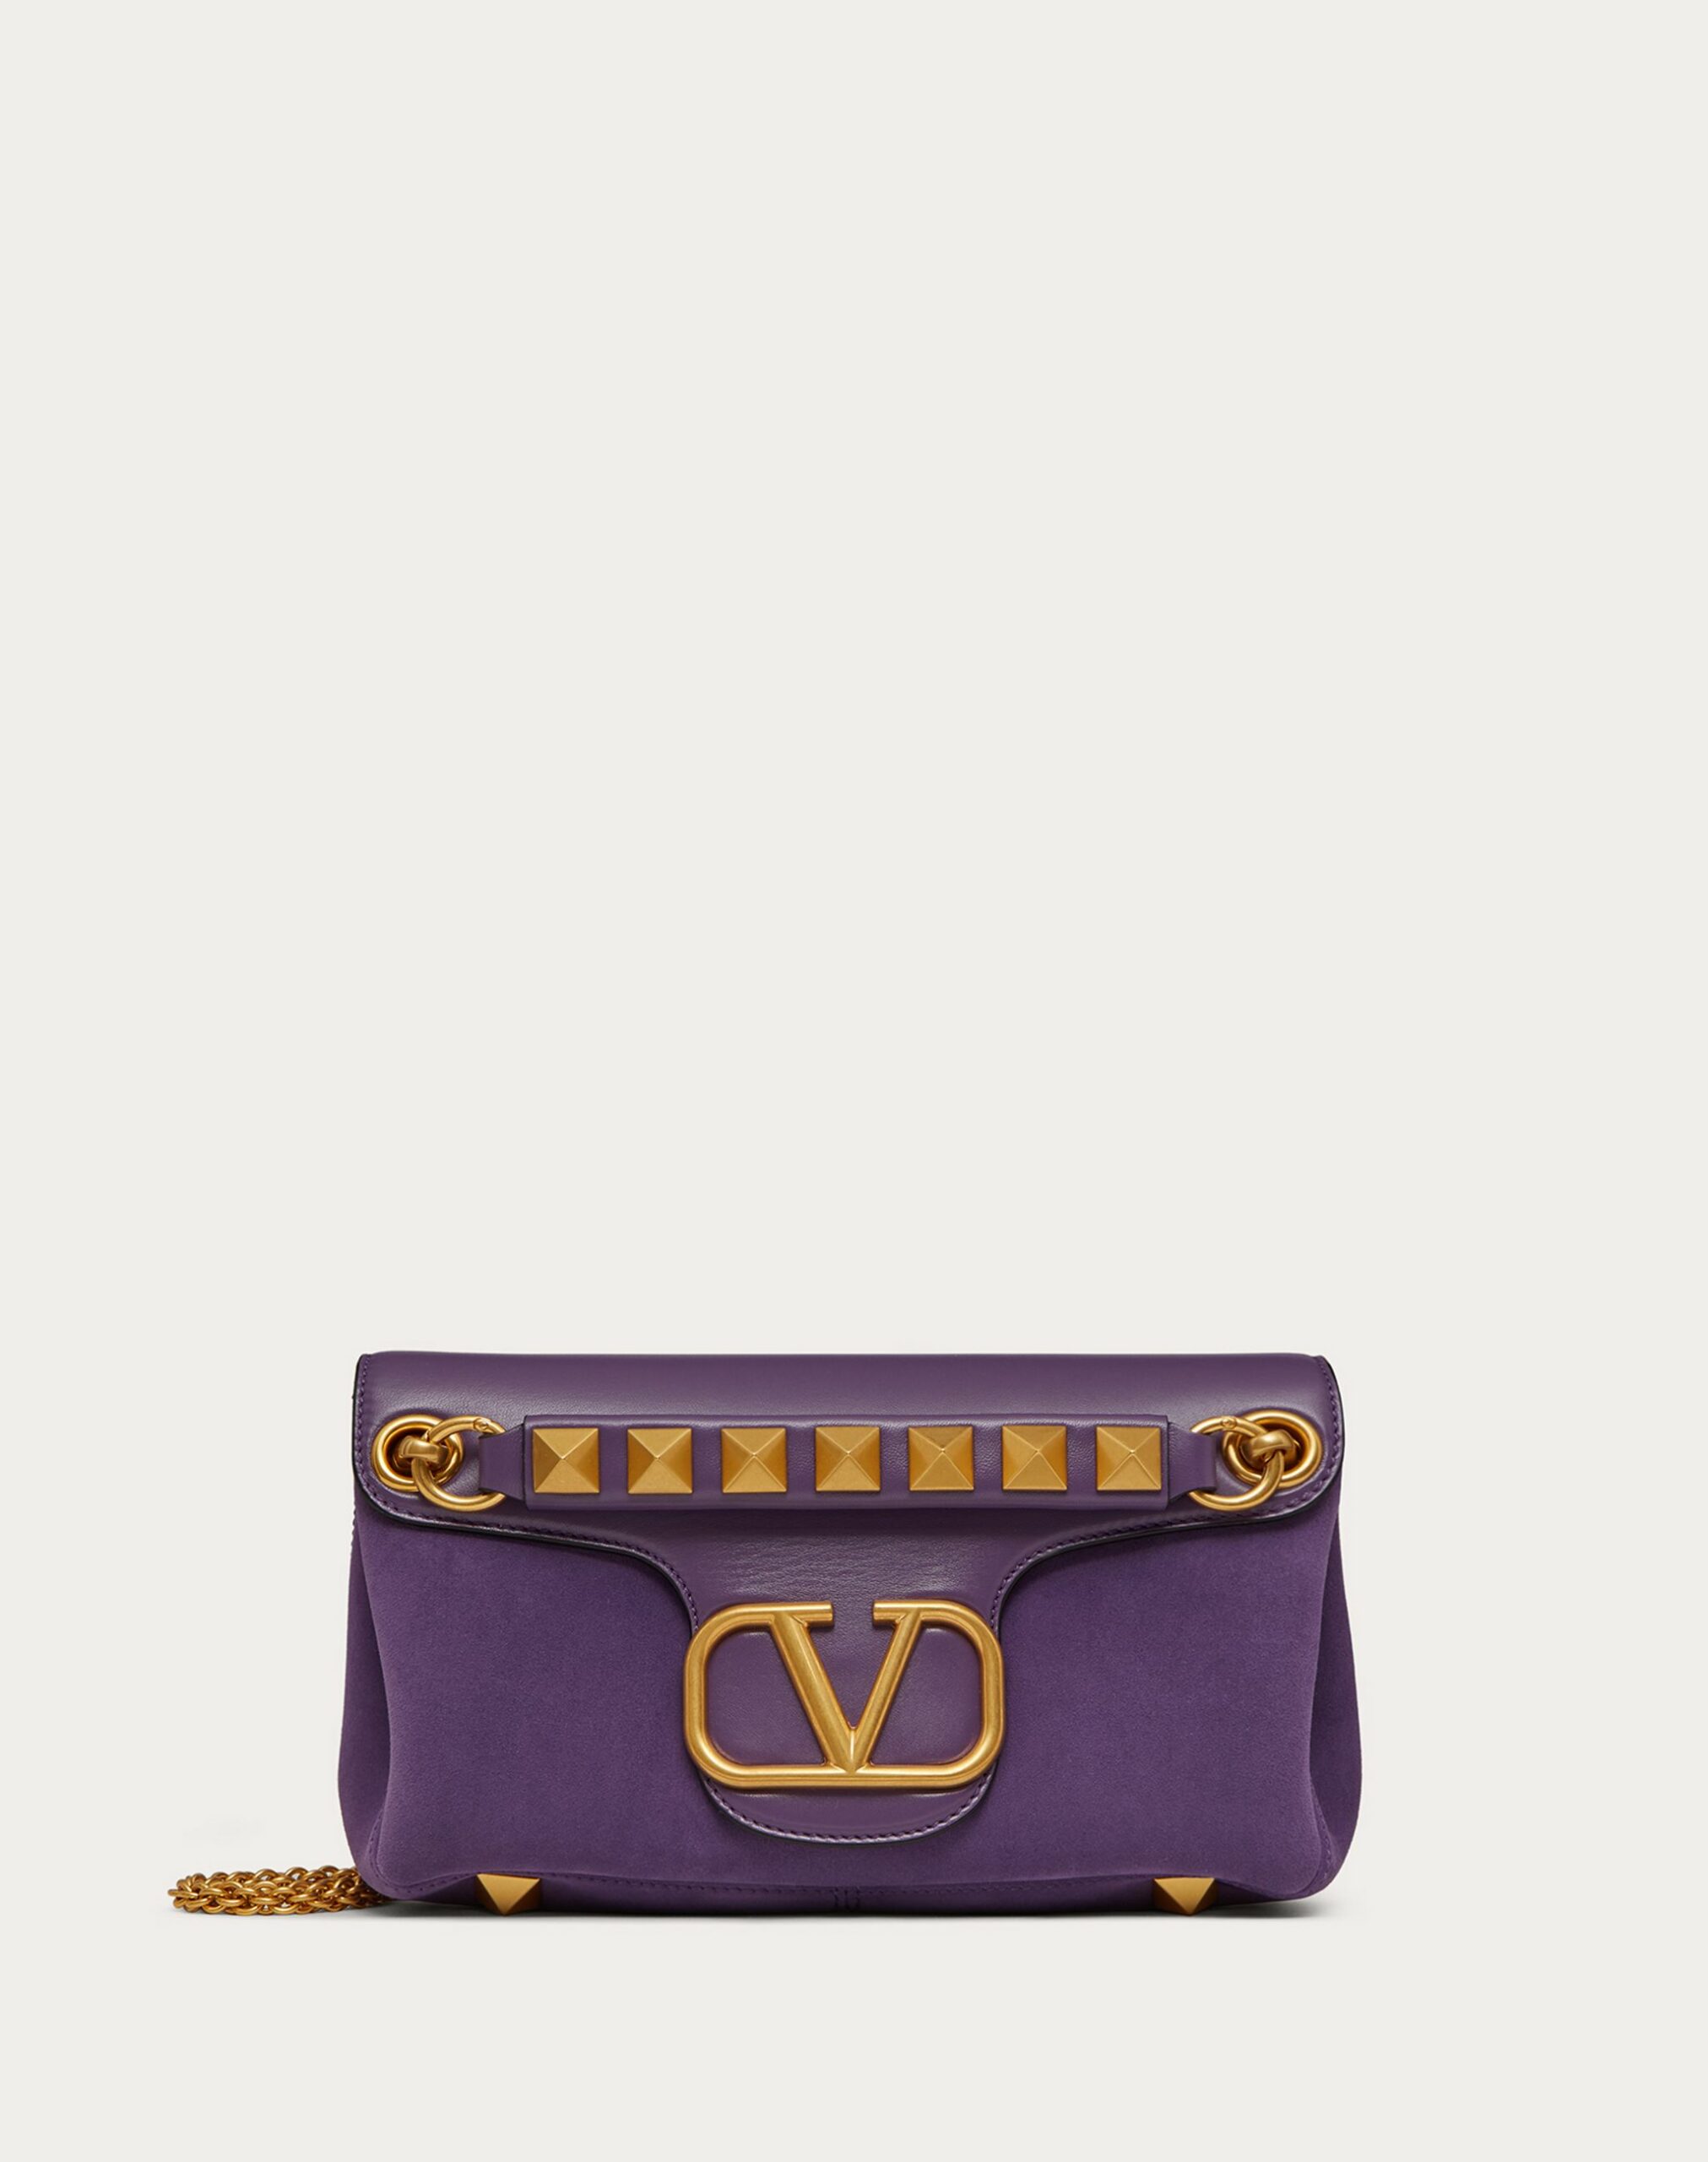 Valentino Stud Sign Shoulder Bag In Nappa And Suede Leather Purple (XW2B0K26IRLT1N)